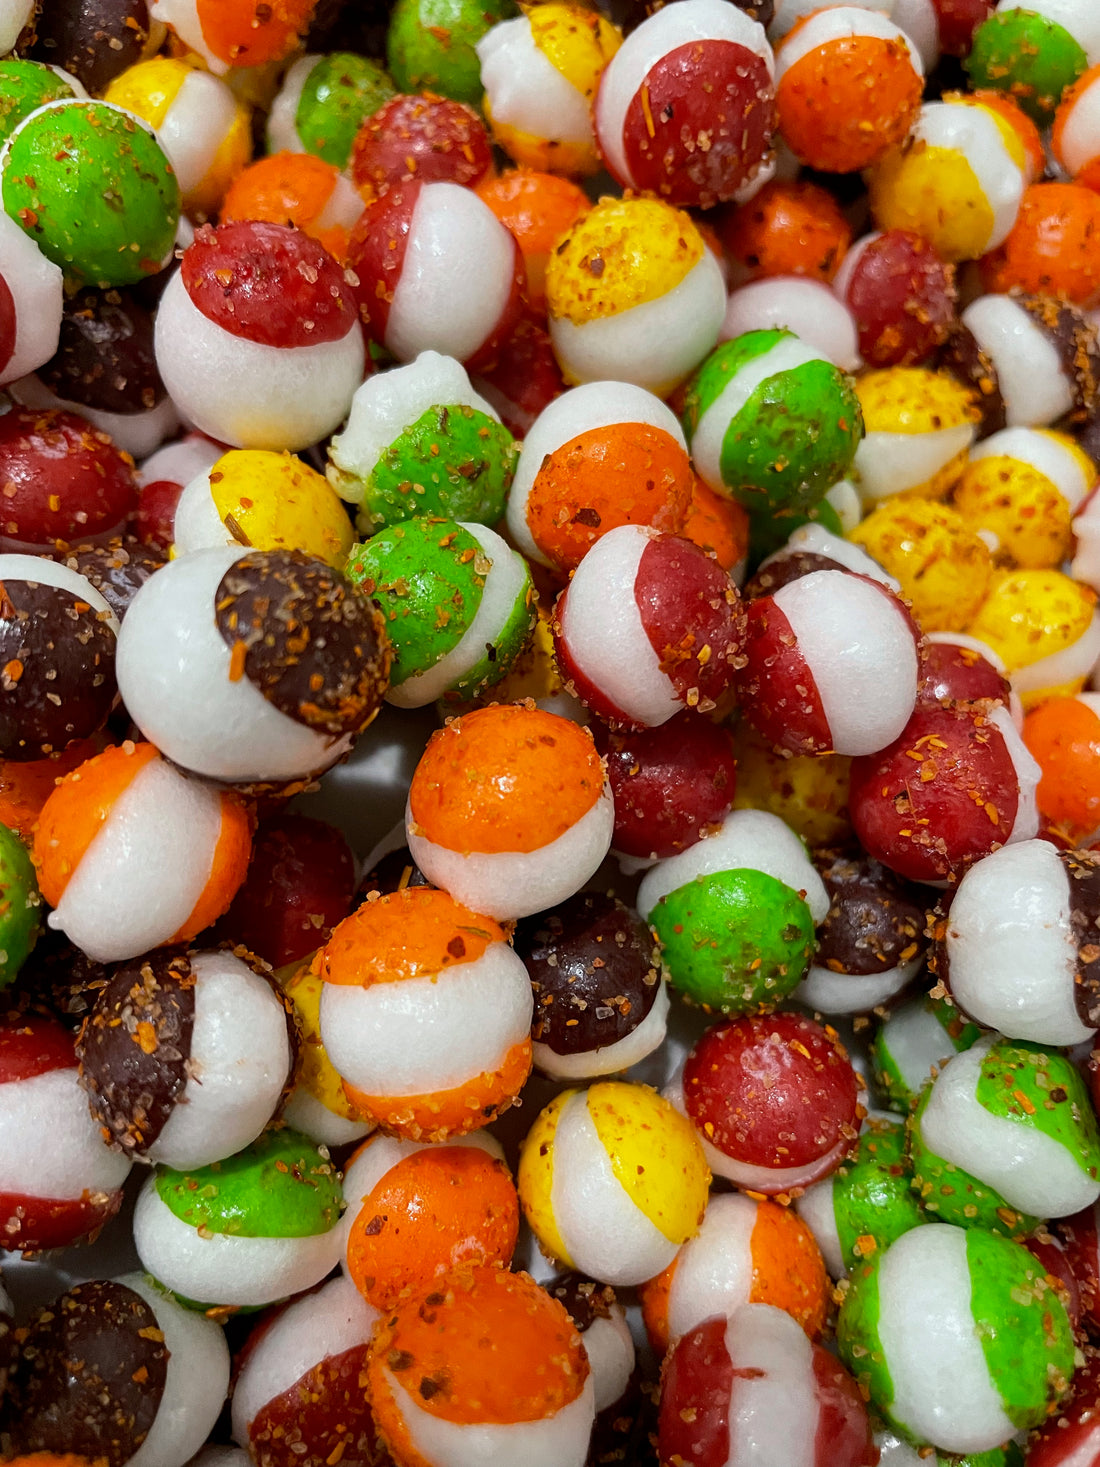 The history of Skittles